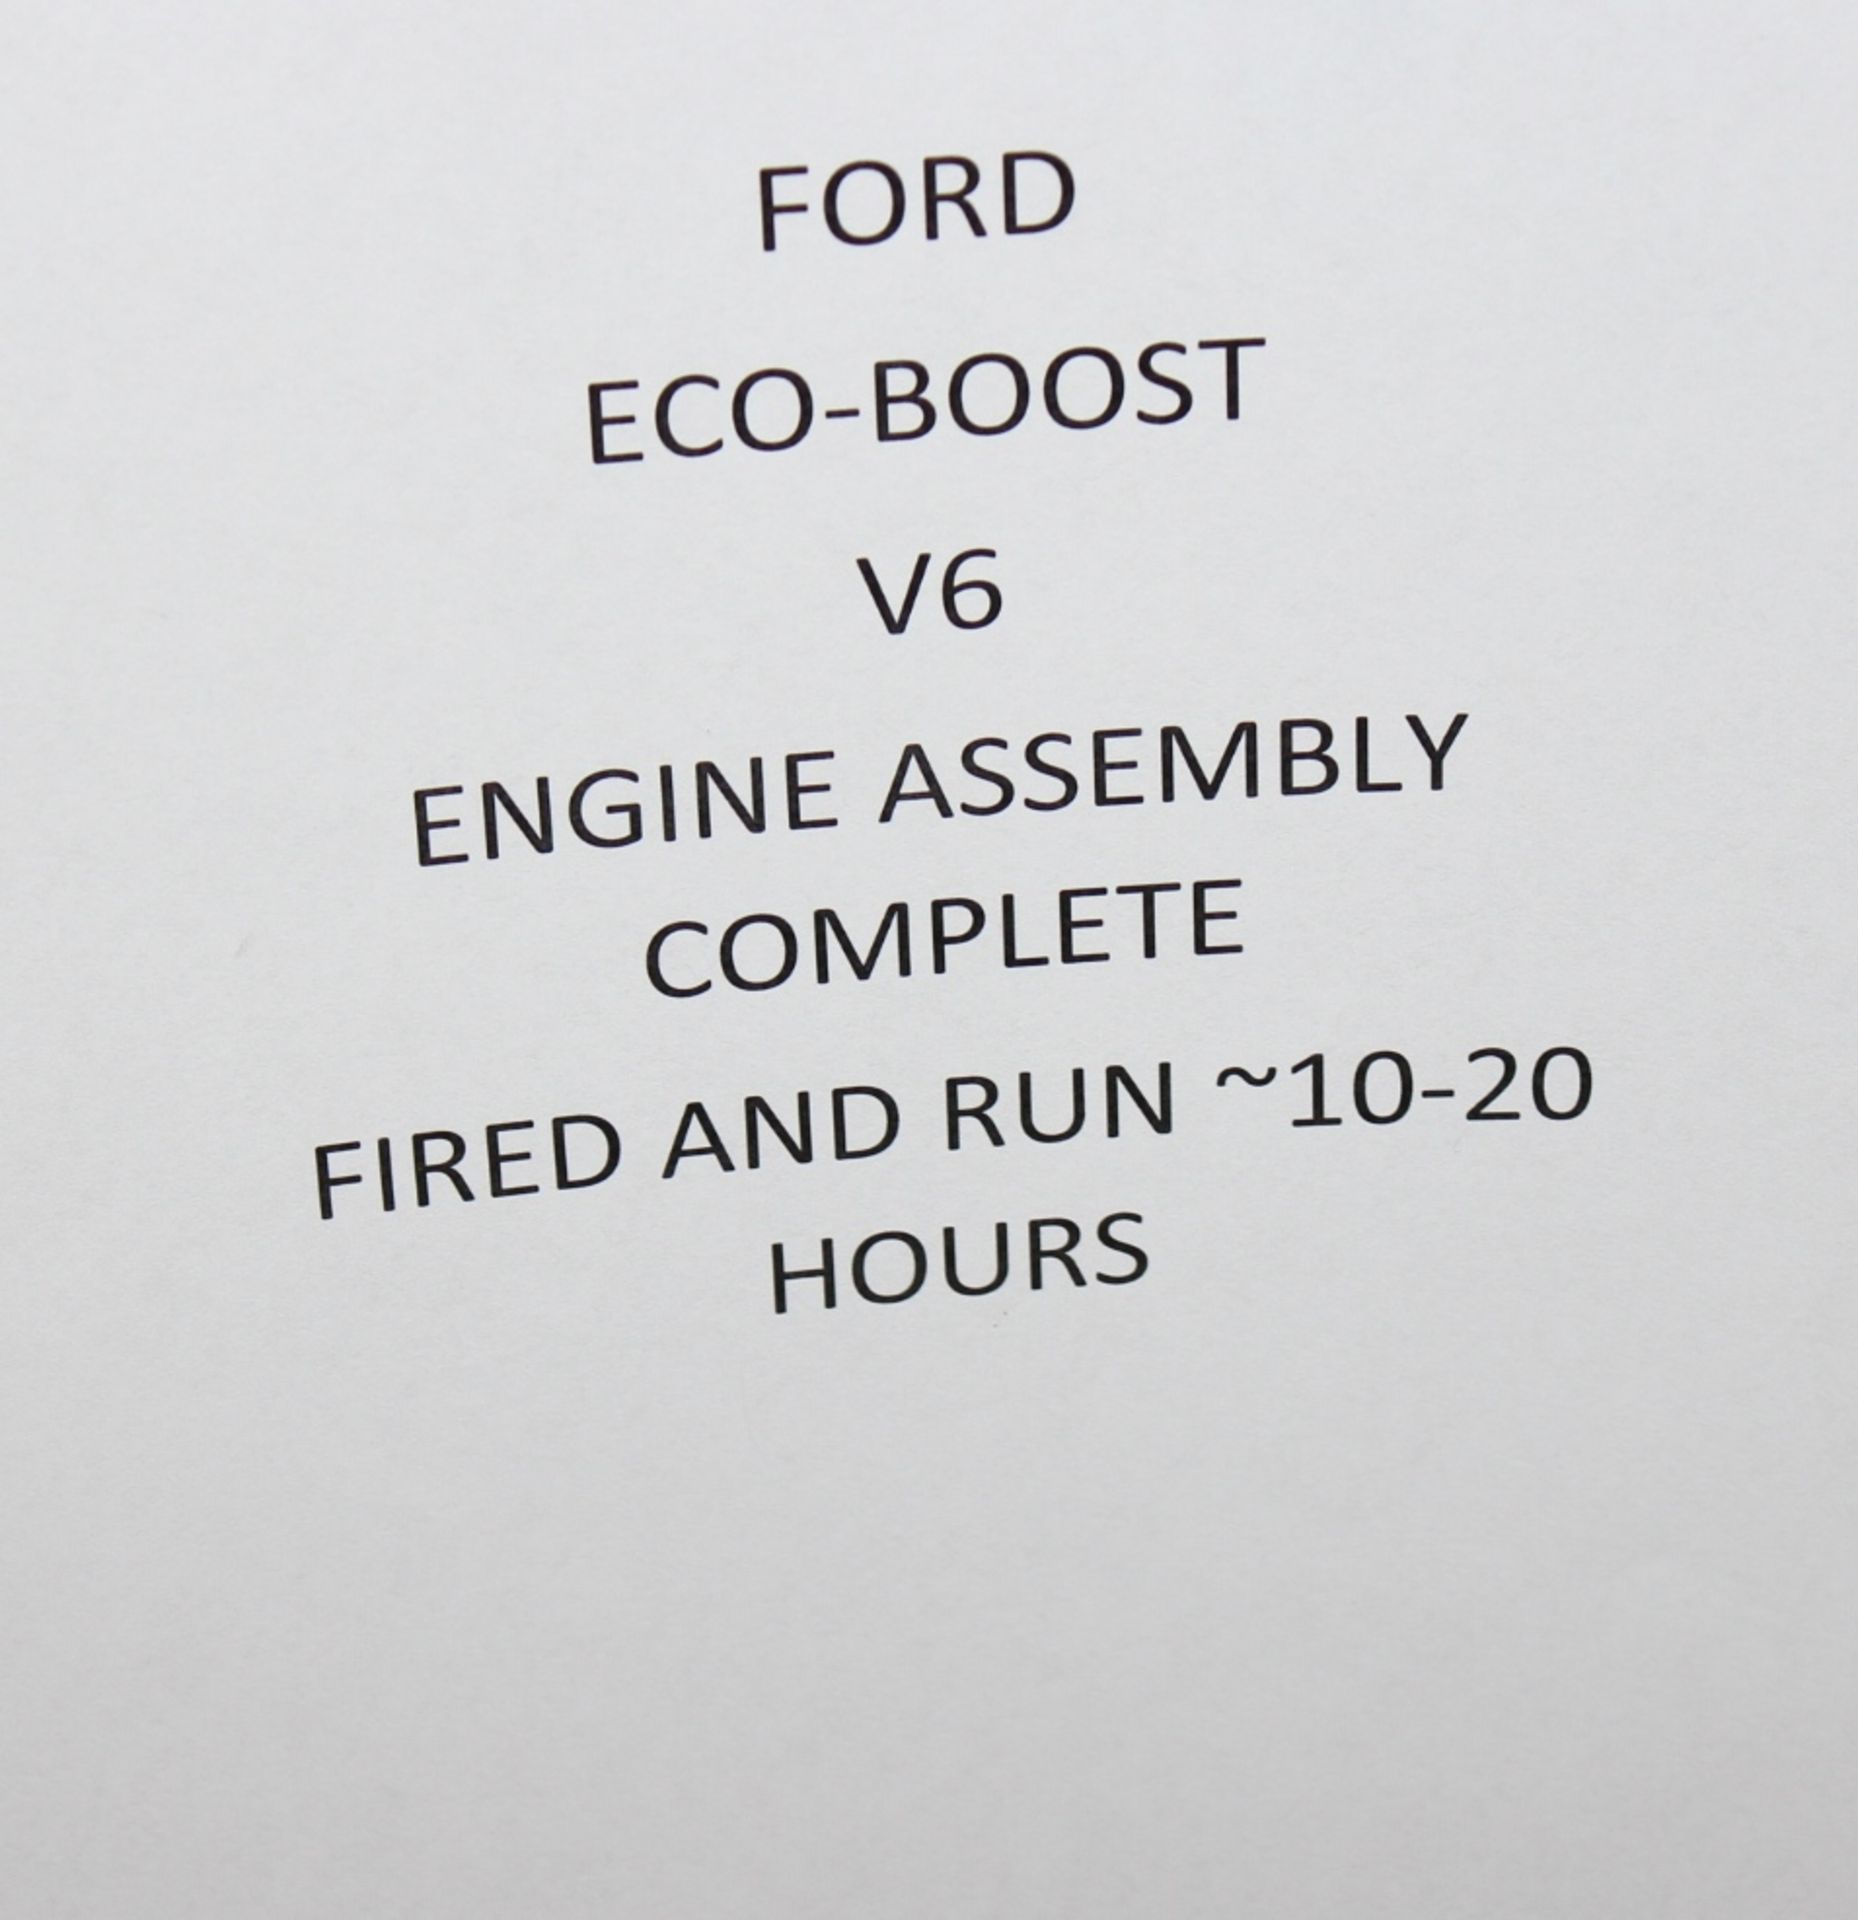 Ford Eco-Boost V6 Engine Assembly Complete - Image 4 of 4